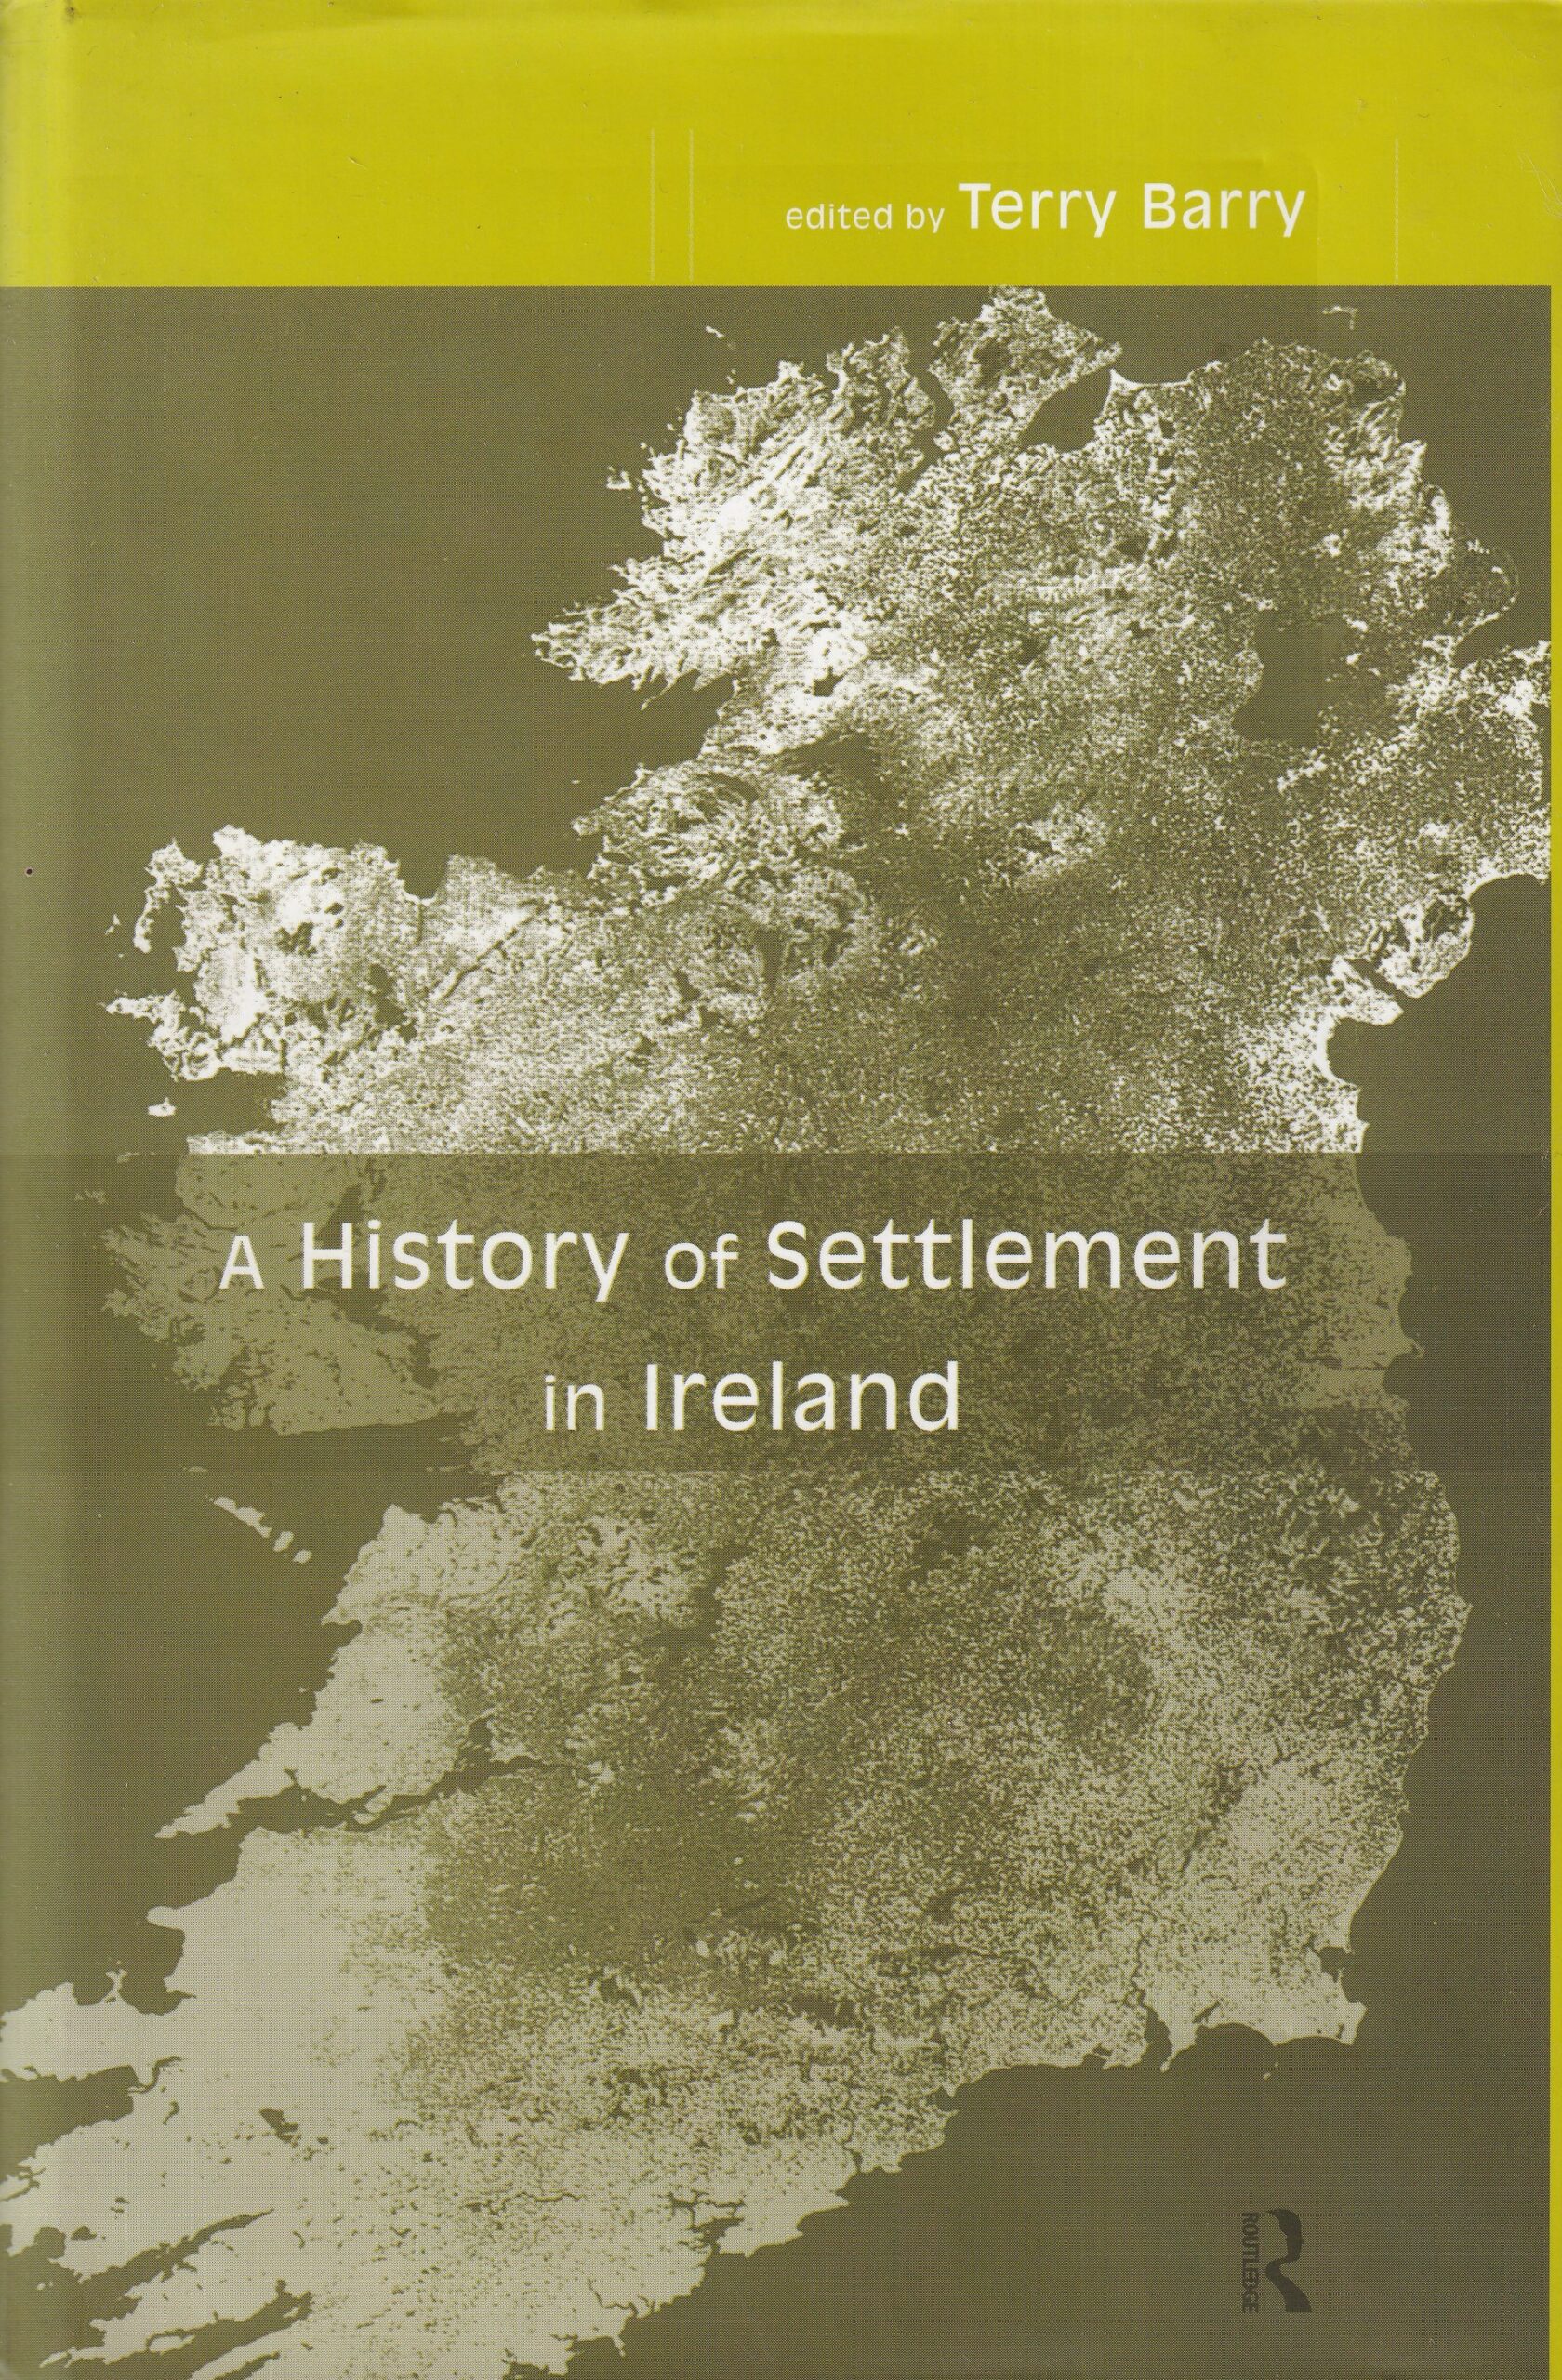 A History of Settlement in Ireland | Terry Barry (ed.) | Charlie Byrne's